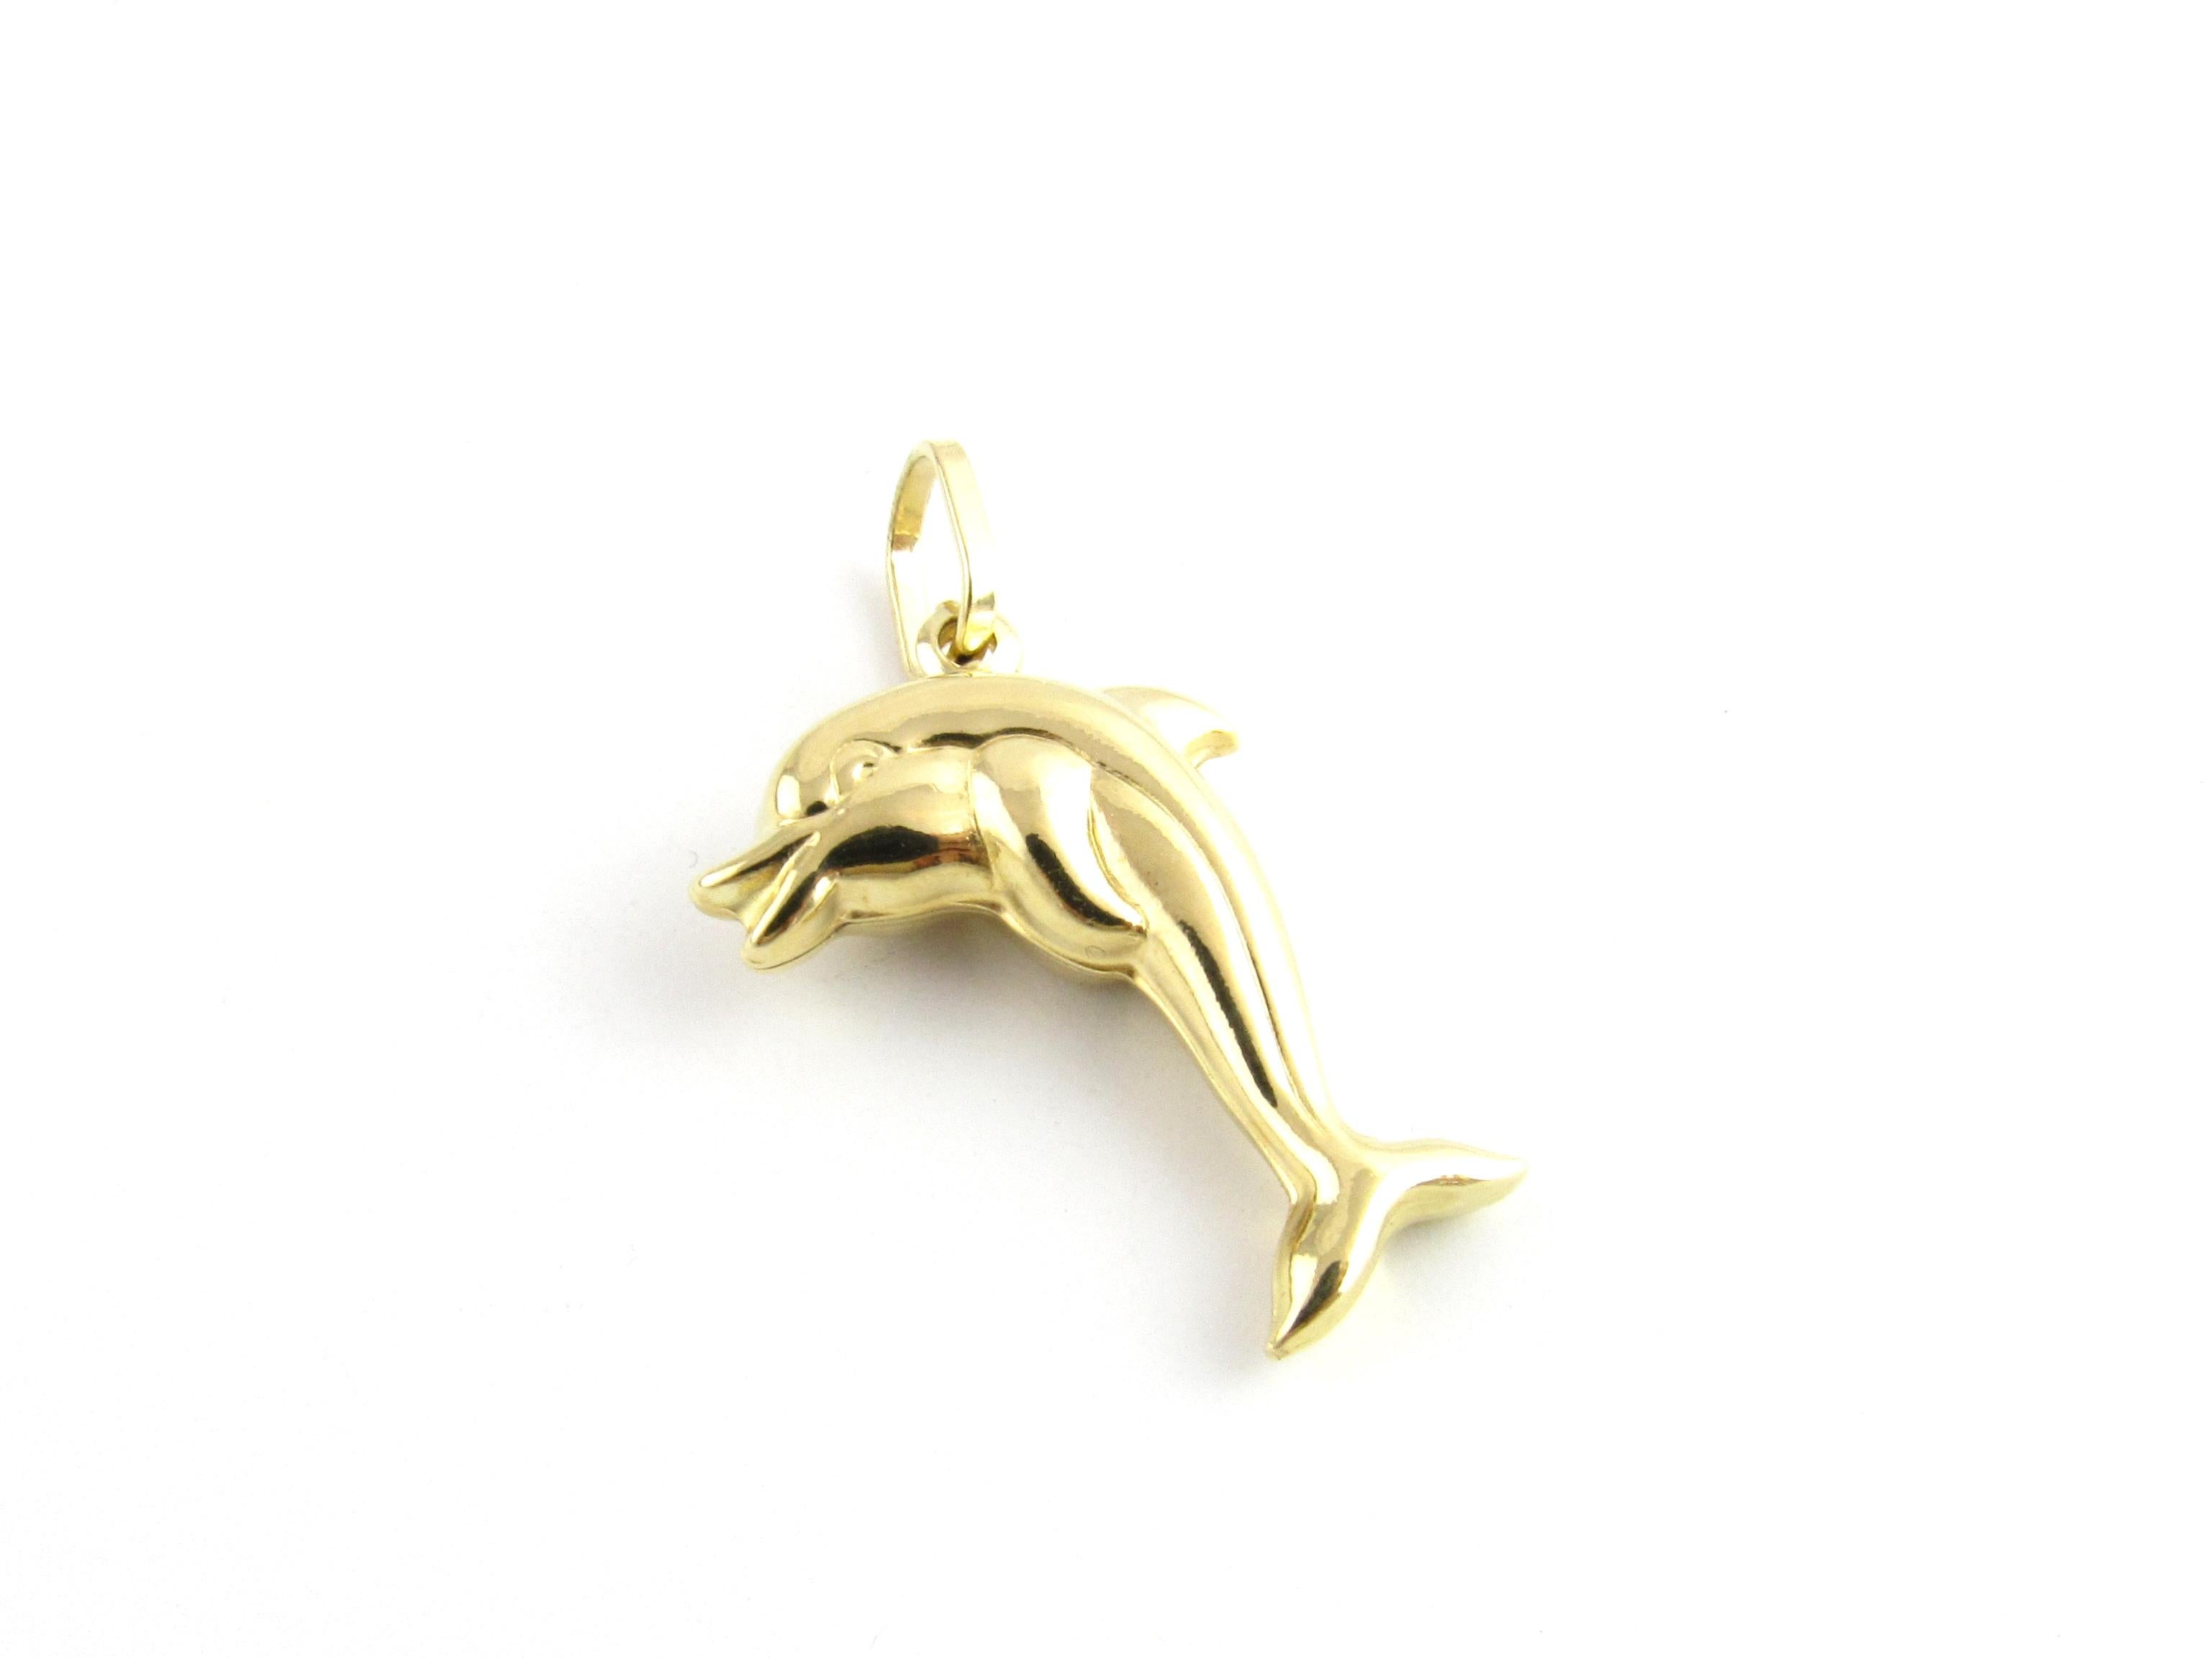 Vintage 18 Karat Yellow Gold Dolphin Charm

Know as the protectors of the seas, dolphins represent joy and harmony!

This lovely charm features a beautifully detailed dolphin crafted in classic 18K yellow gold.

Size: 28 mm x 18 mm (actual